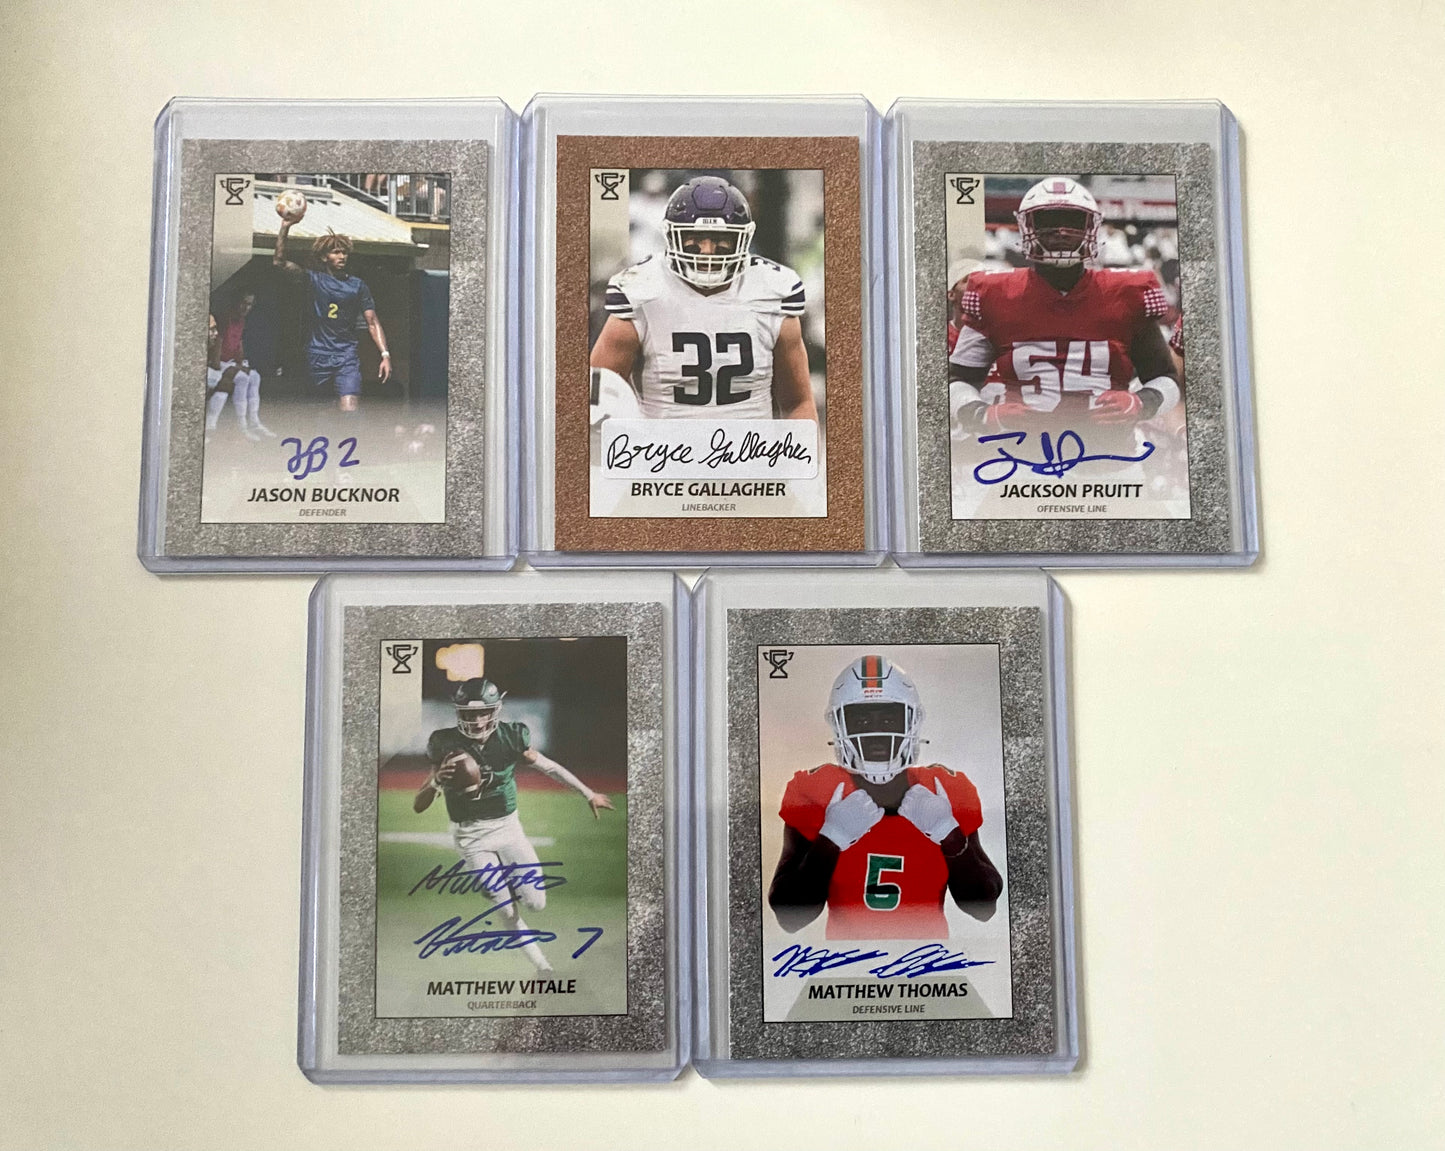 1 Autographed Card Mystery Pack